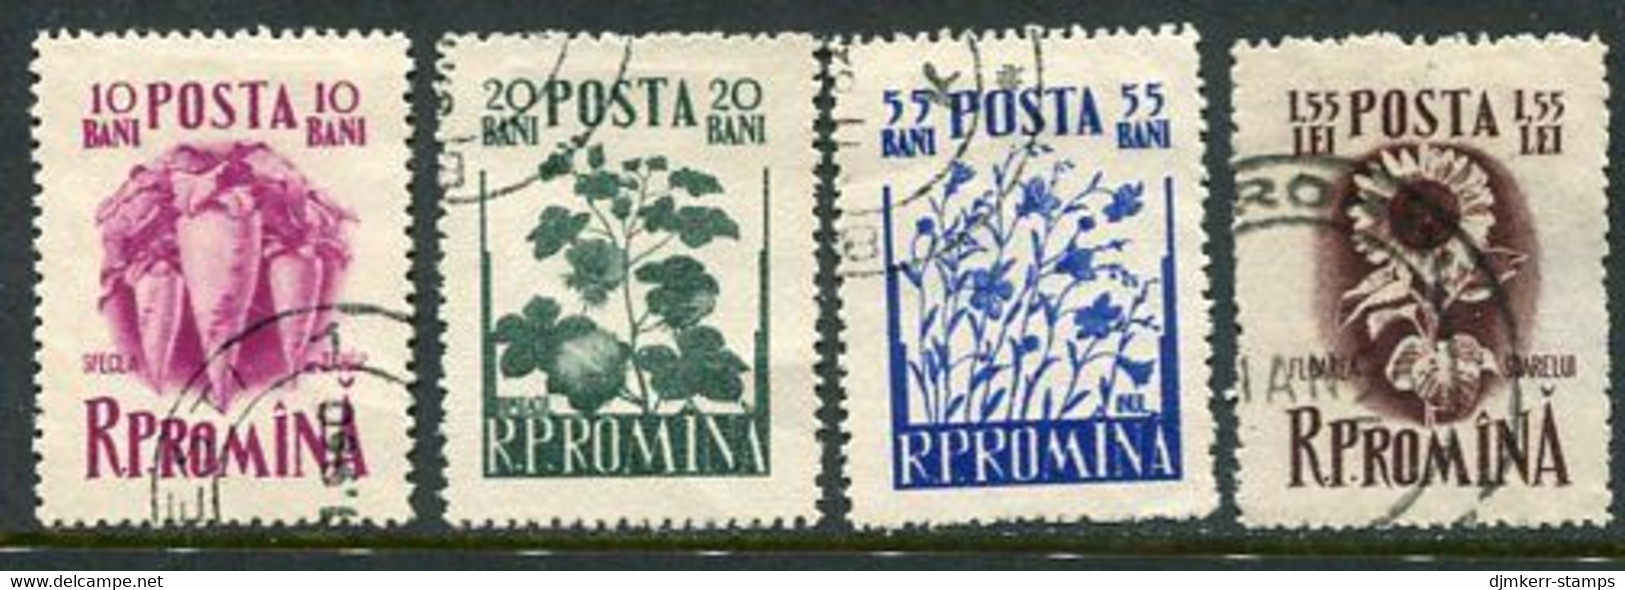 ROMANIA 1955 Agricultural Plants Used.  Michel 1547-50 - Gebraucht